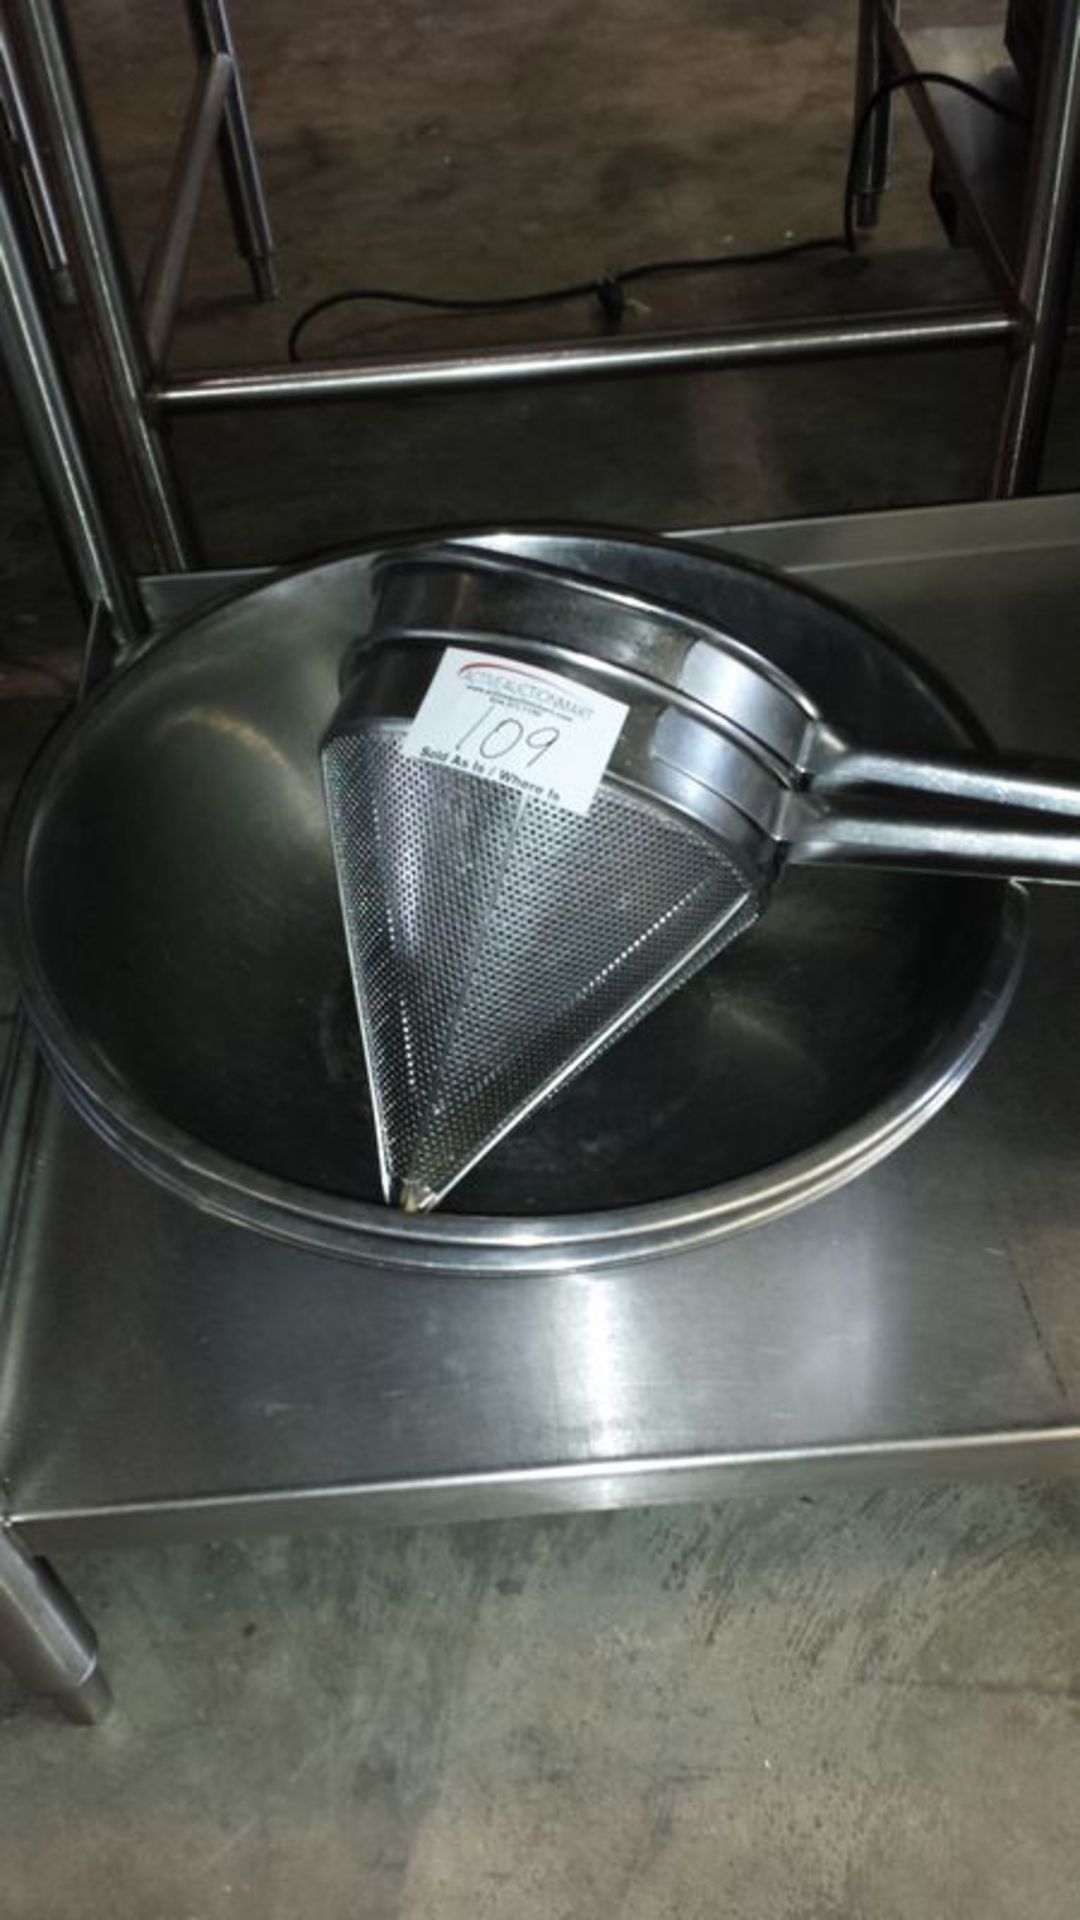 4 large stainless steel bowls with to colander